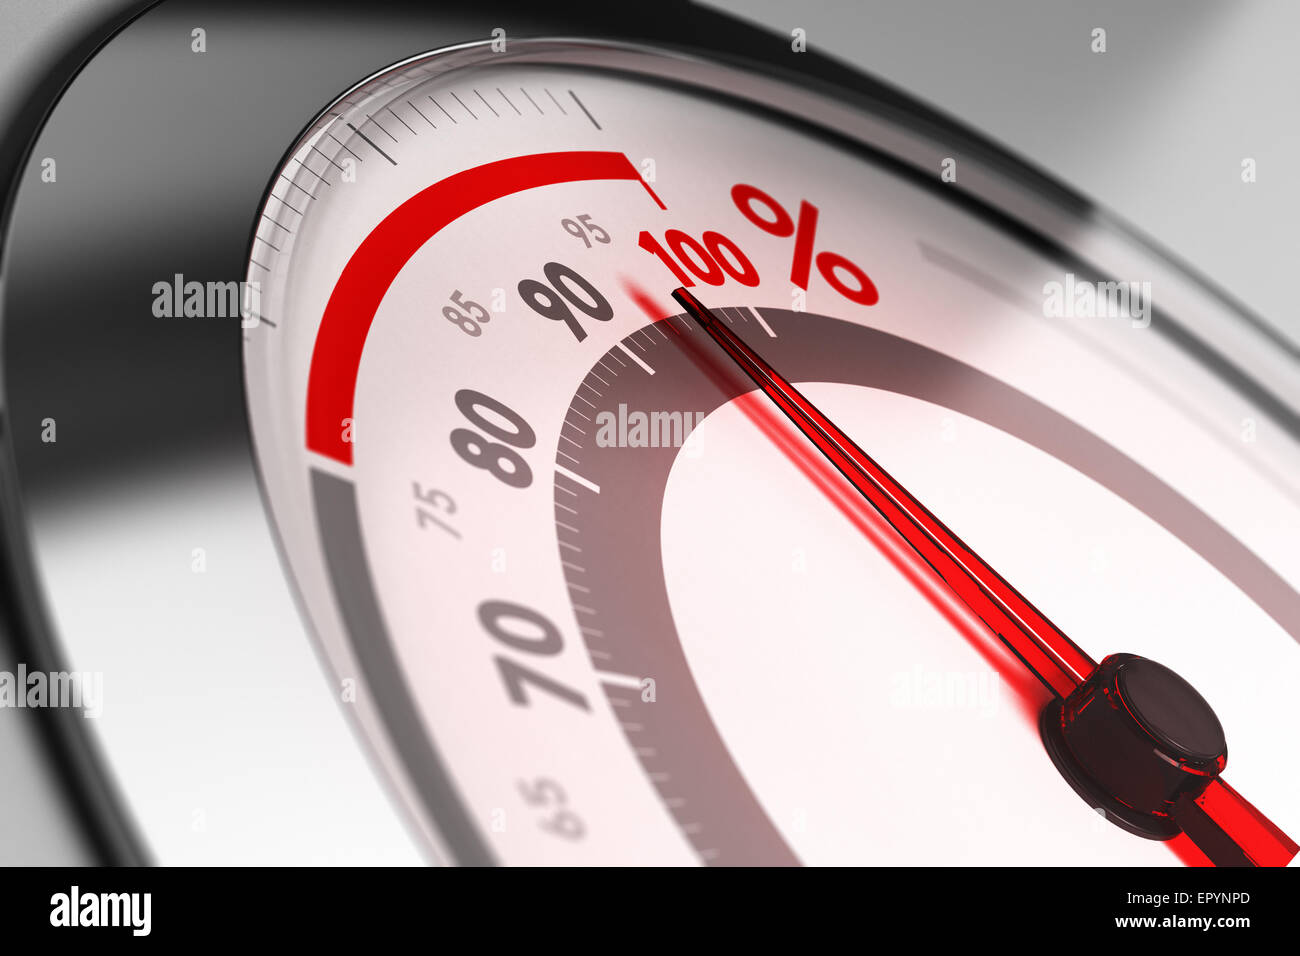 Percent meter with the needle pointing very close to one hundred. Concept of excellence or full capacity. Stock Photo